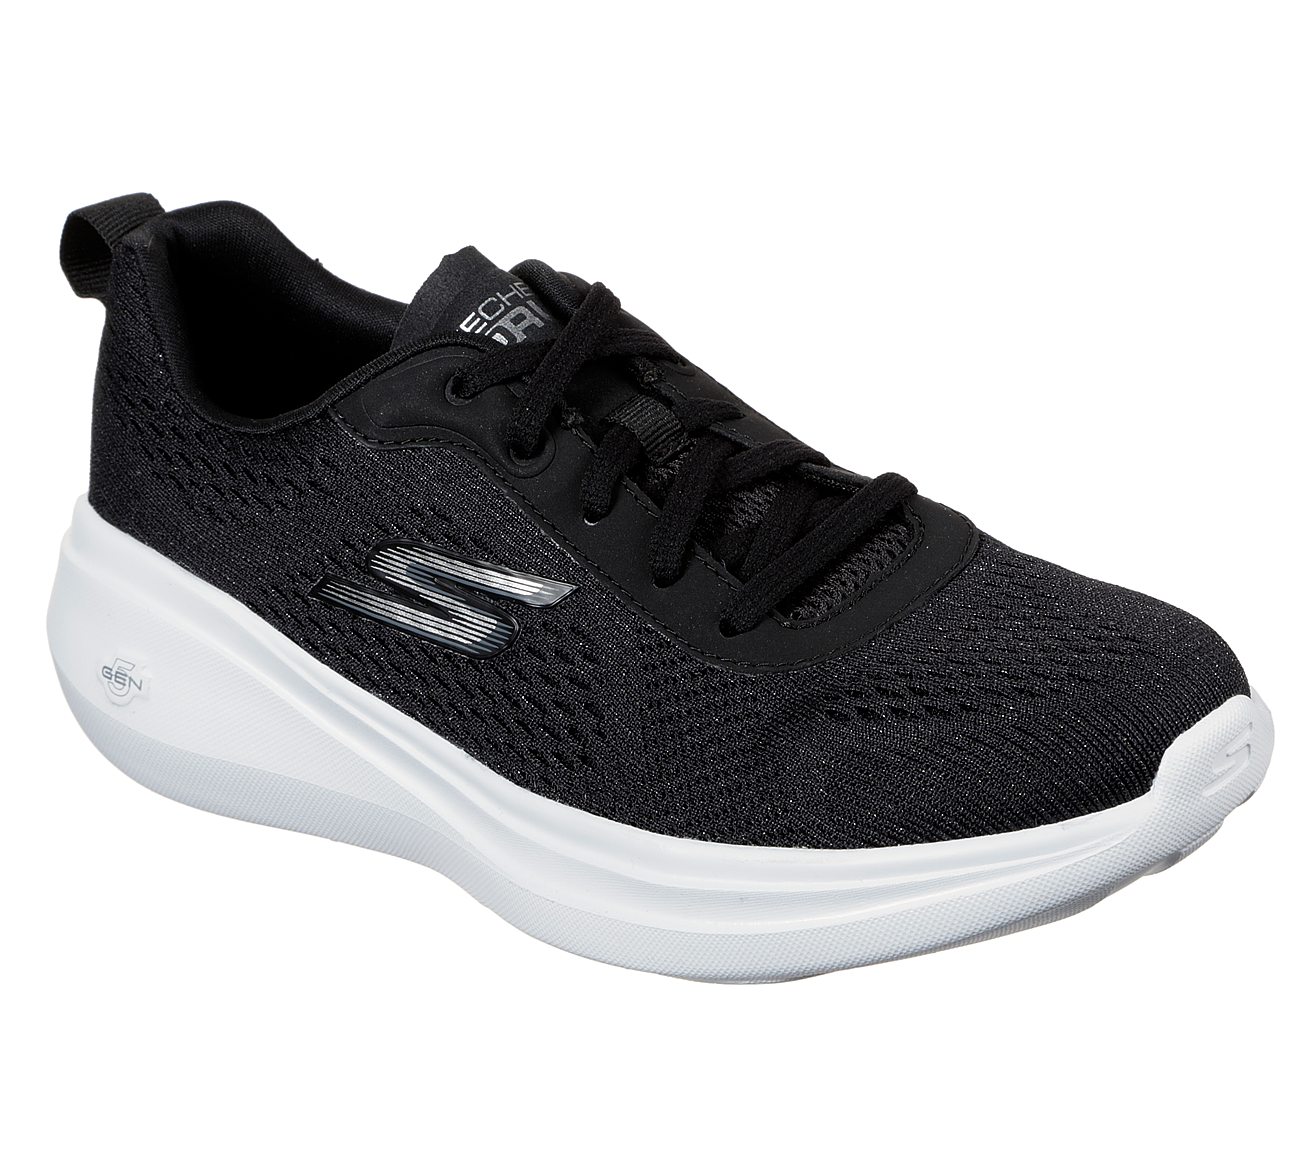 GO RUN FAST-FLOAT, BLACK/WHITE Footwear Lateral View